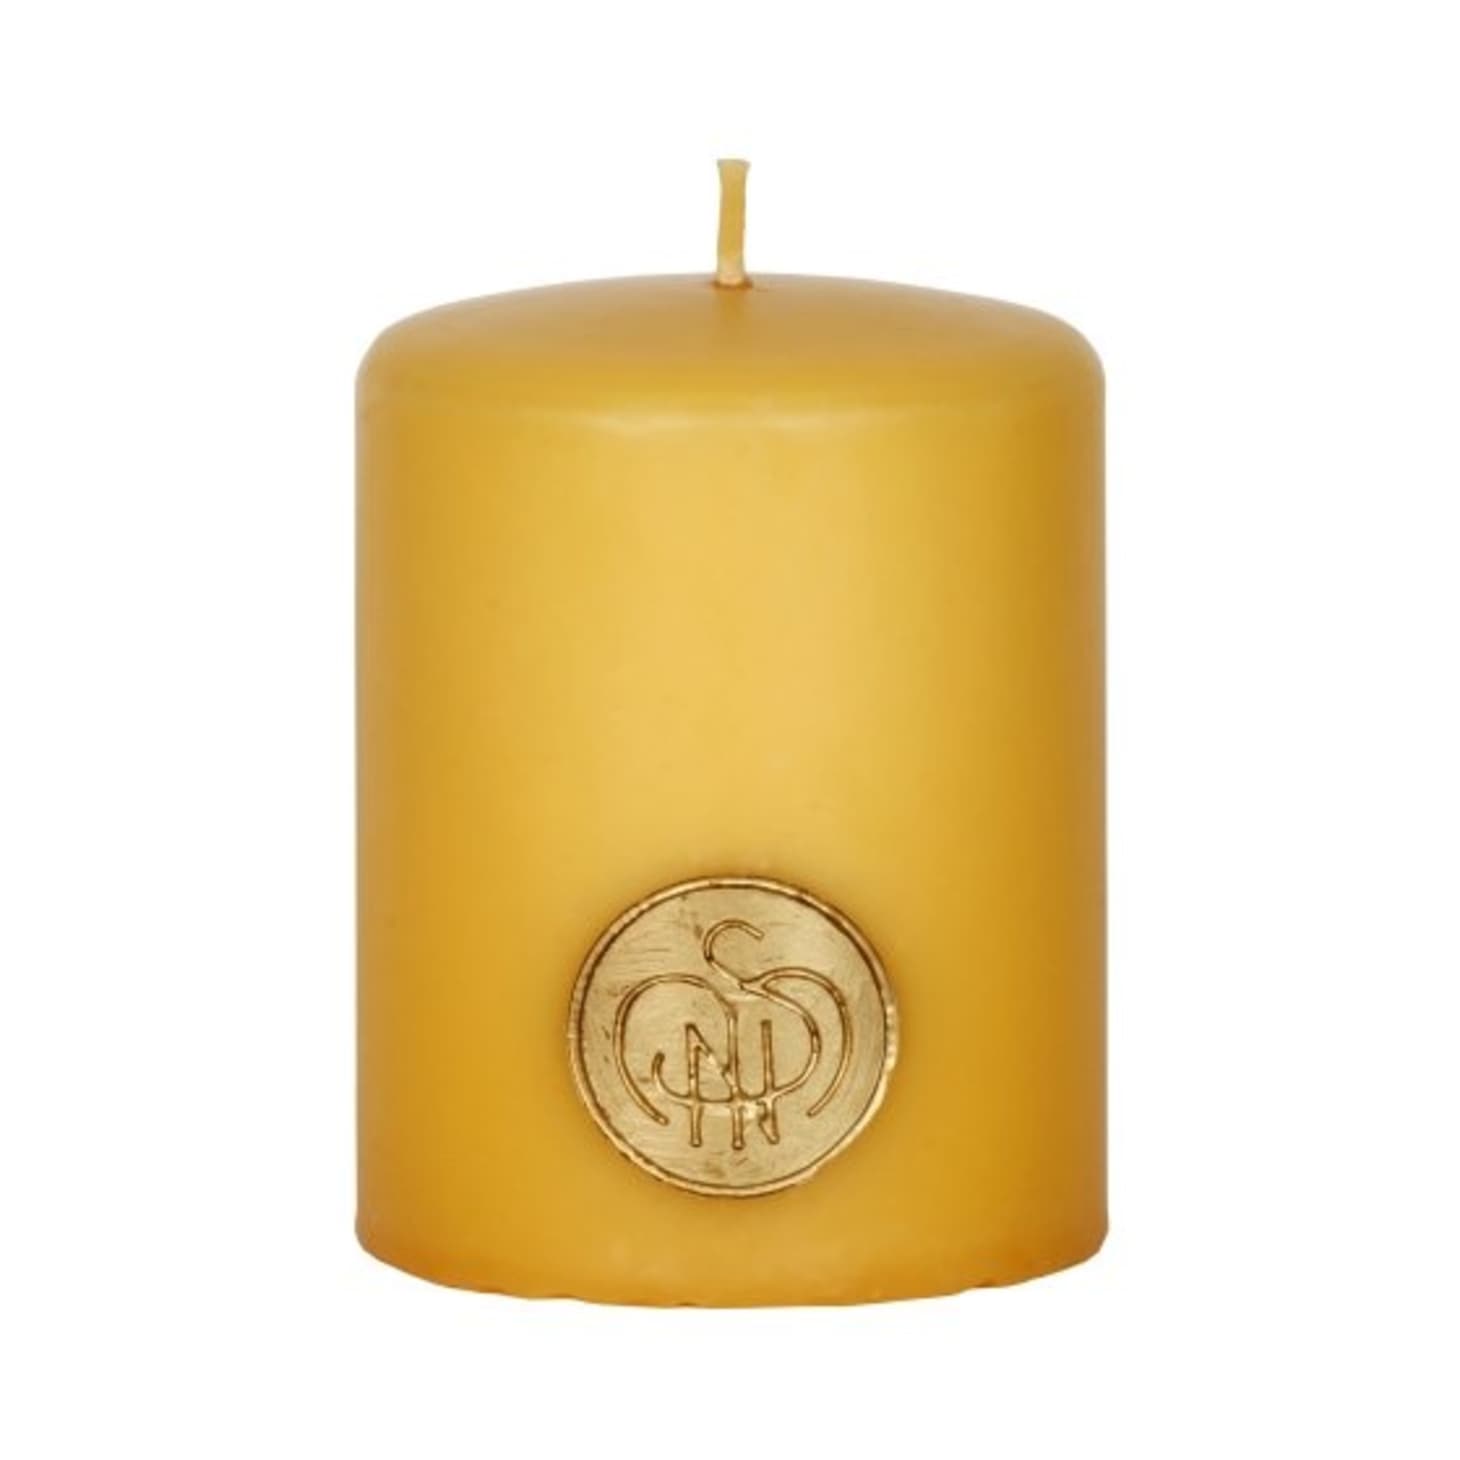 Top Scented Candles: Tatine, Le Labo, Diptyque & Many More | Apartment ...